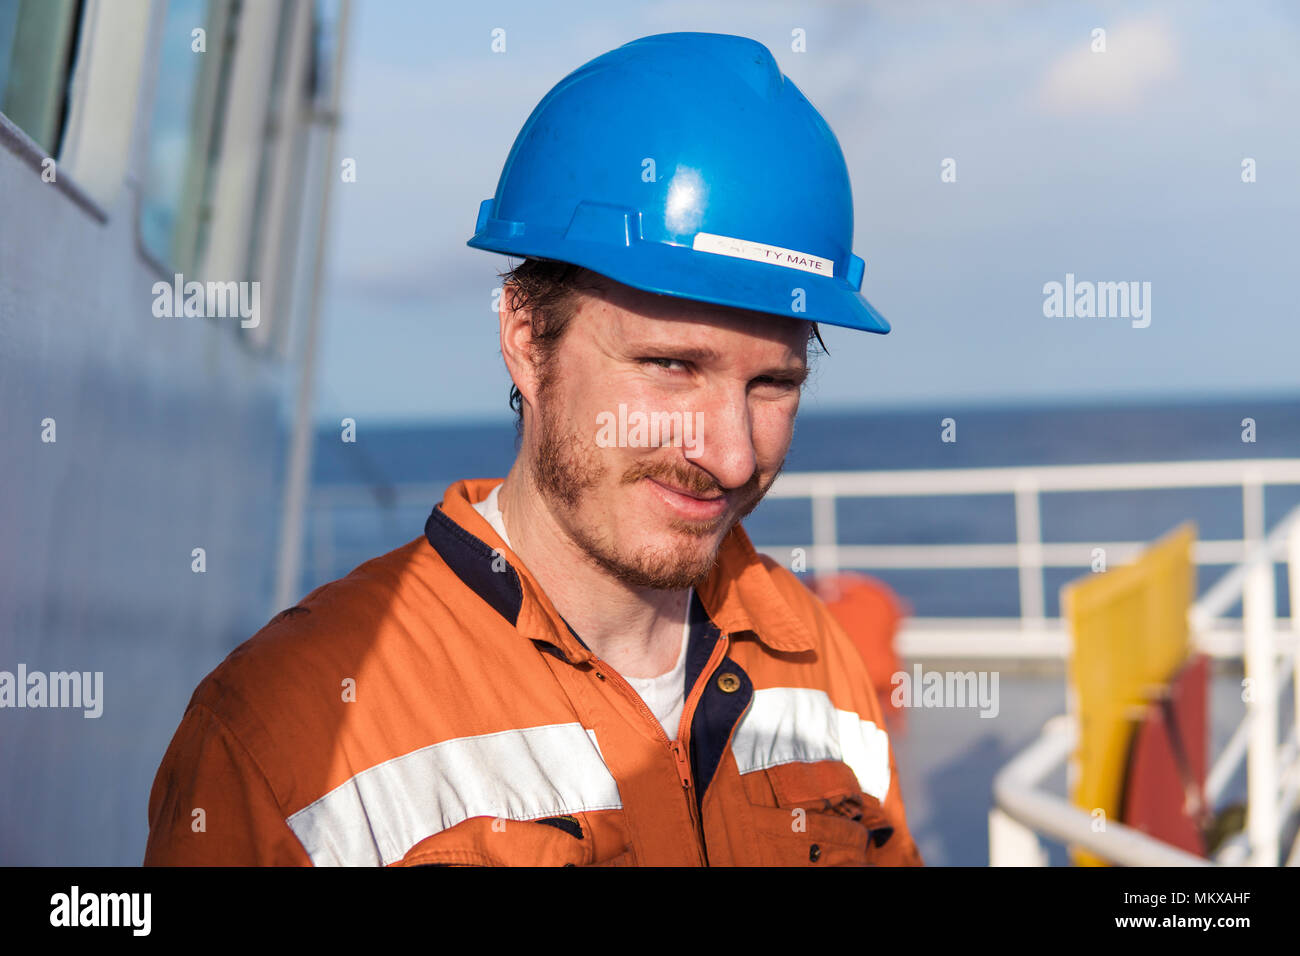 Marine Deck Officer or Chief mate on deck of ship Stock Photo